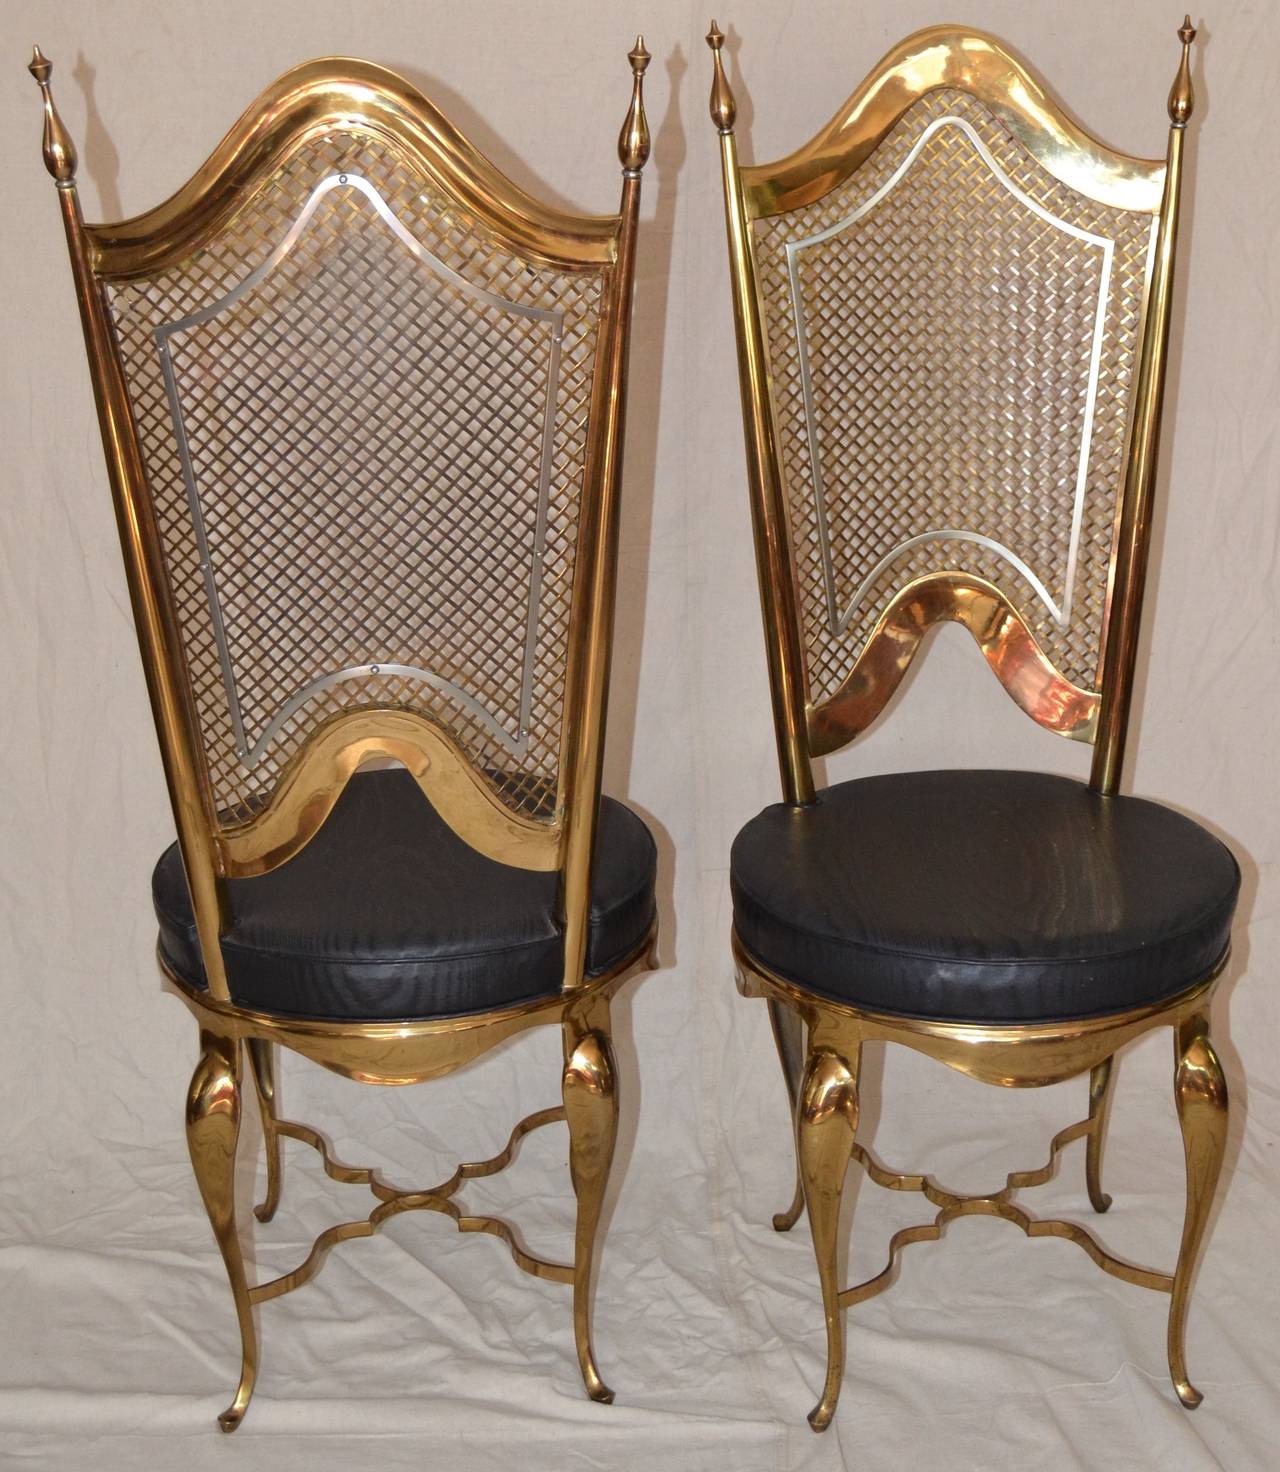 Heavy cast brass accent chairs with decorative applied steel, unusual and interesting form. Brass faux caning and shield shaped steel, exaggerated finials, arabesques brass stretchers. Original watermarked moire upholstery, upholstery label